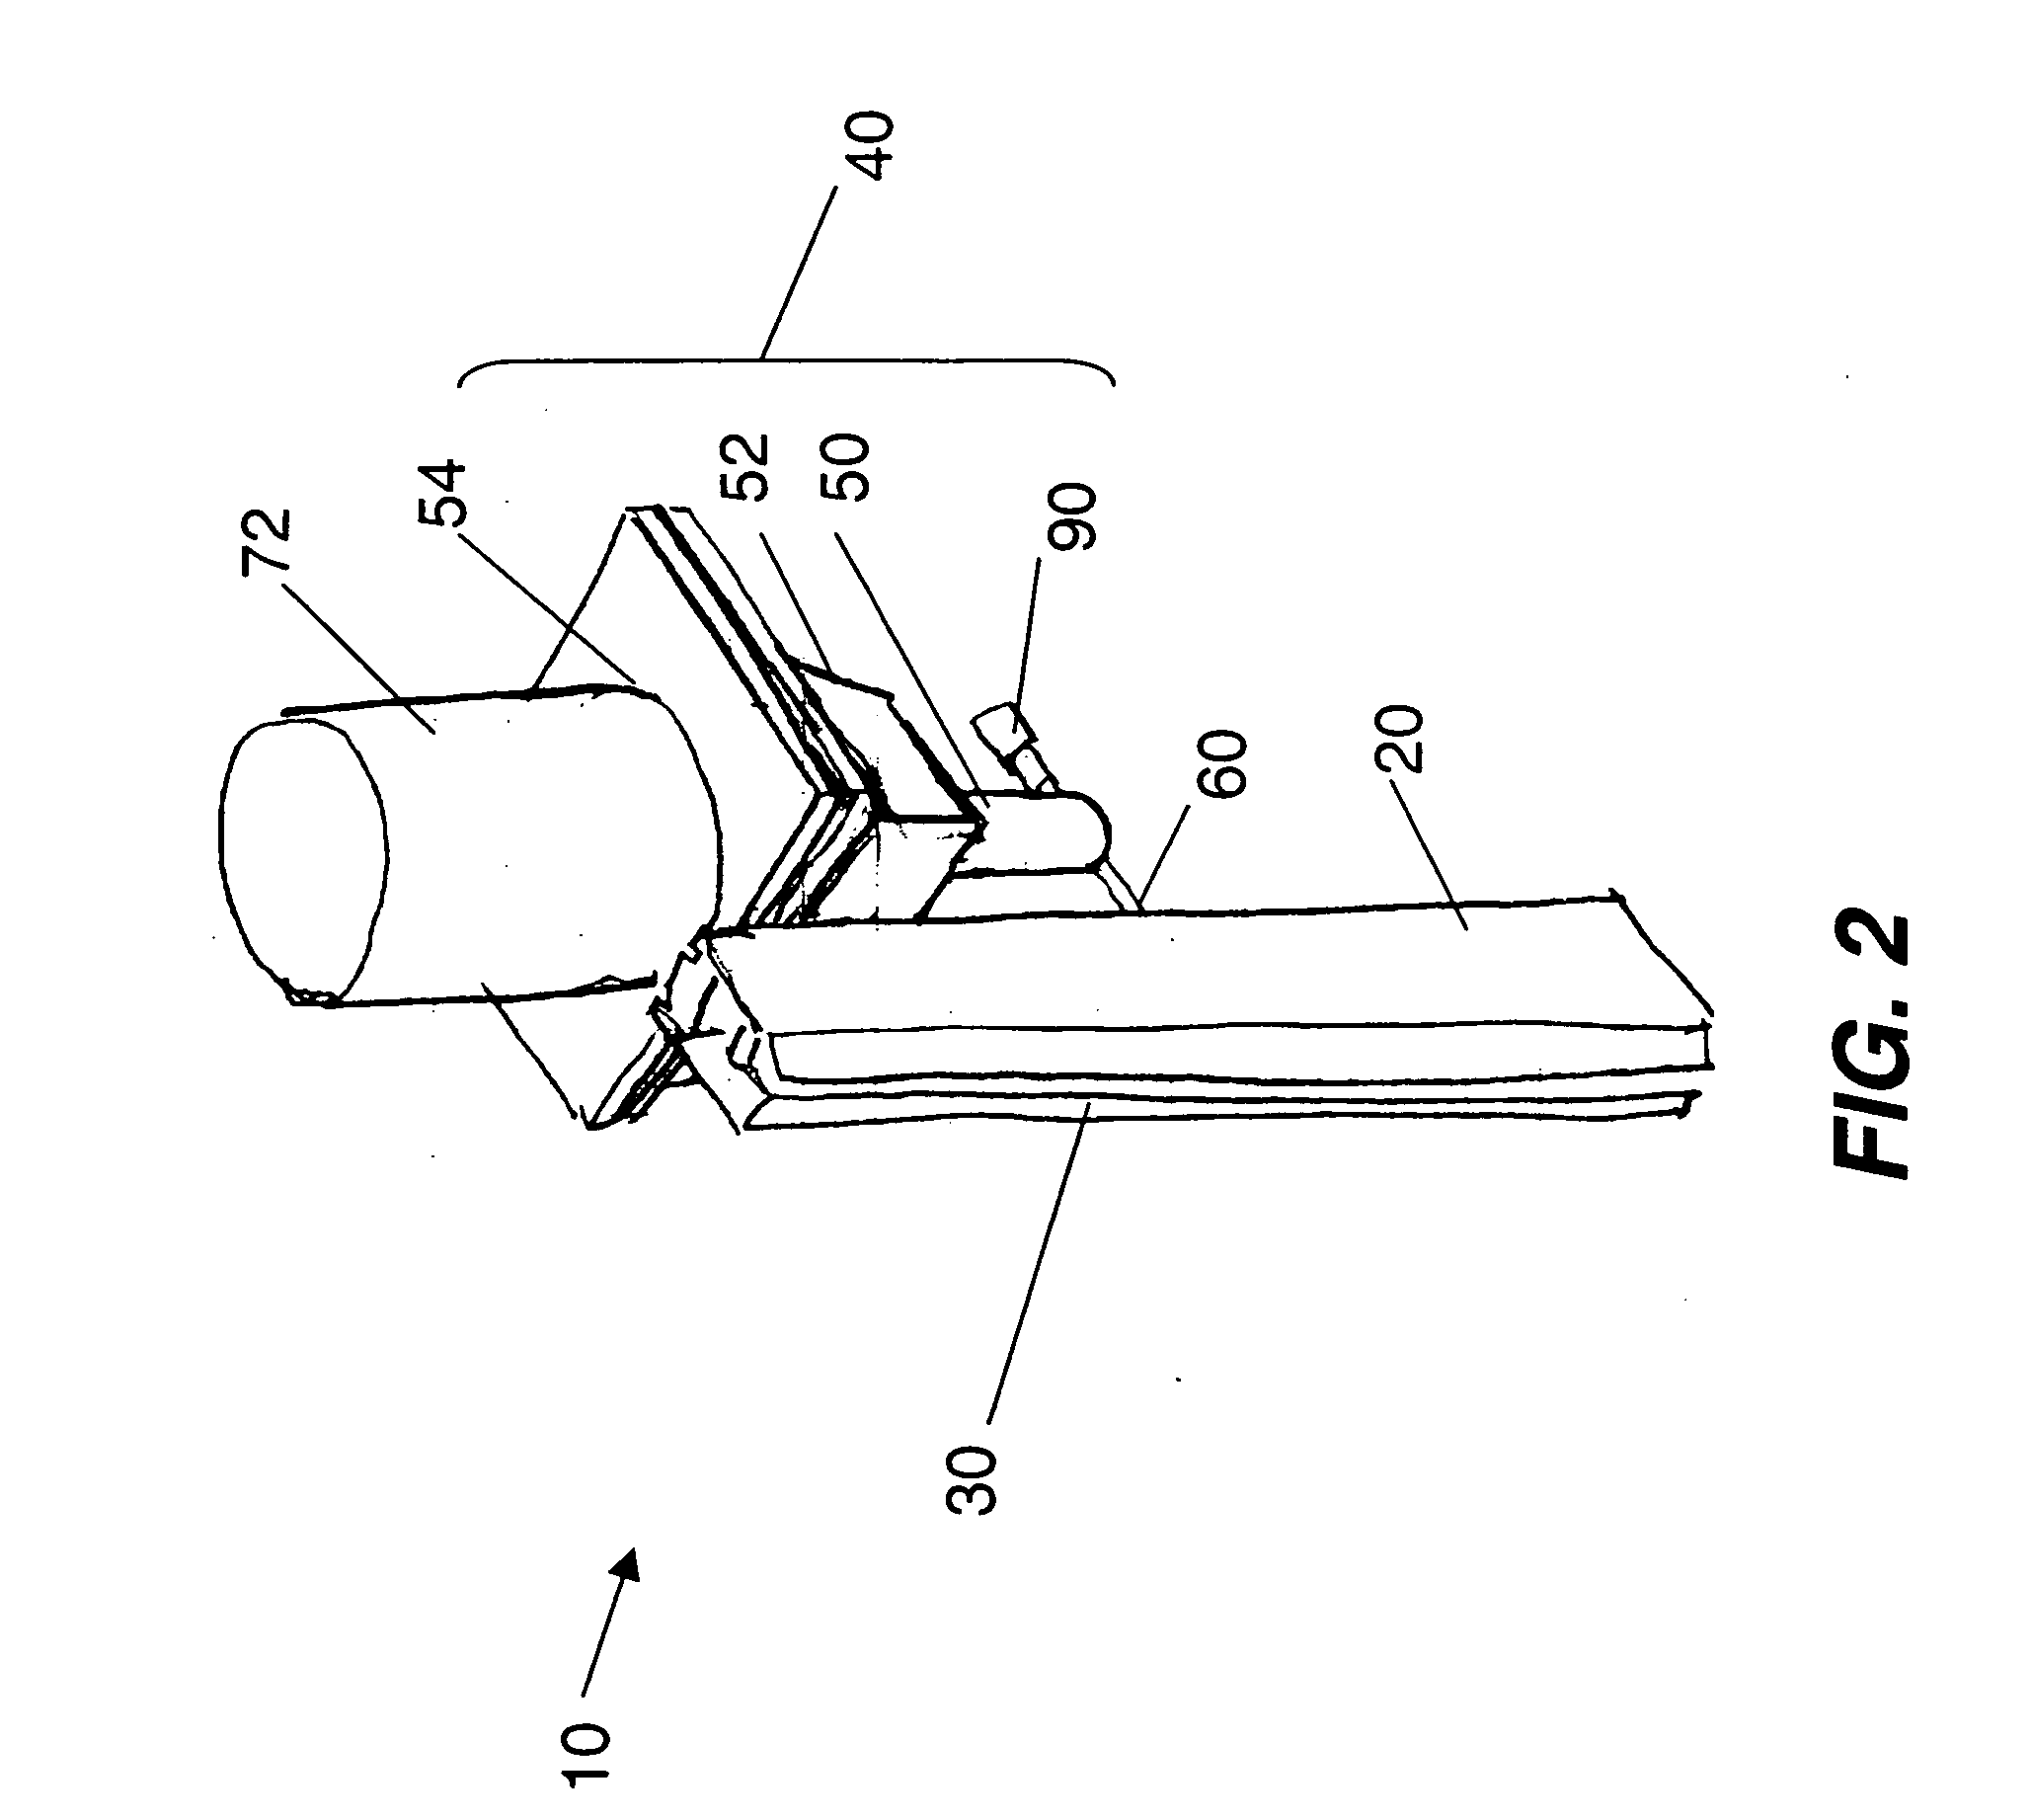 Deposition system using sealed replenishment container